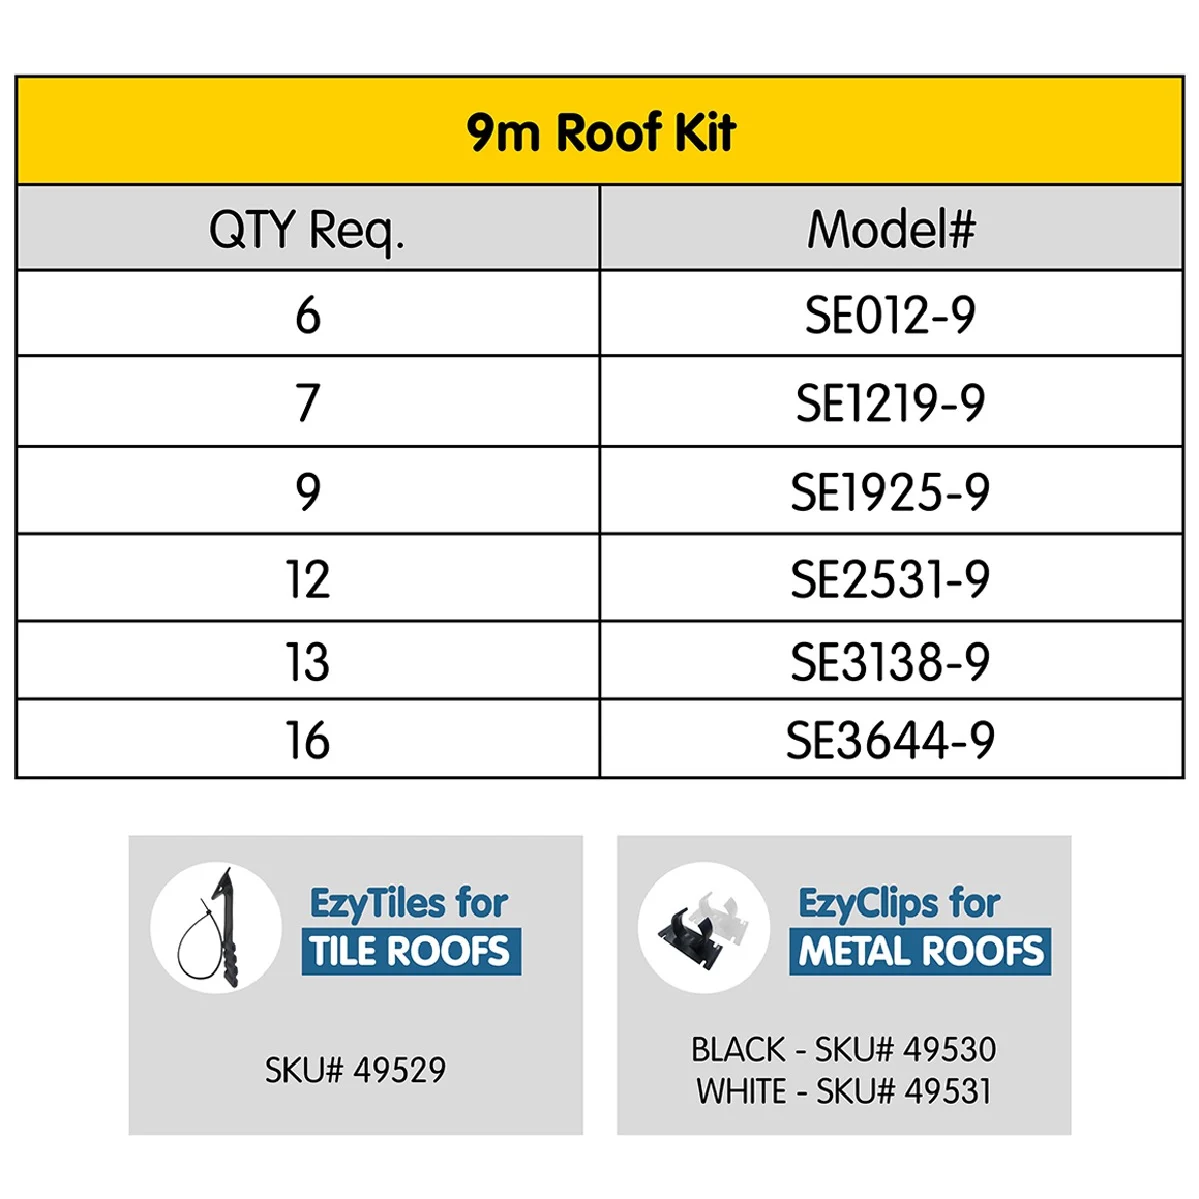 SOLAR EEZY POOL HEATING KITS FOR 9M ROOF SE012-9 SUITS 0-12SQM POOL